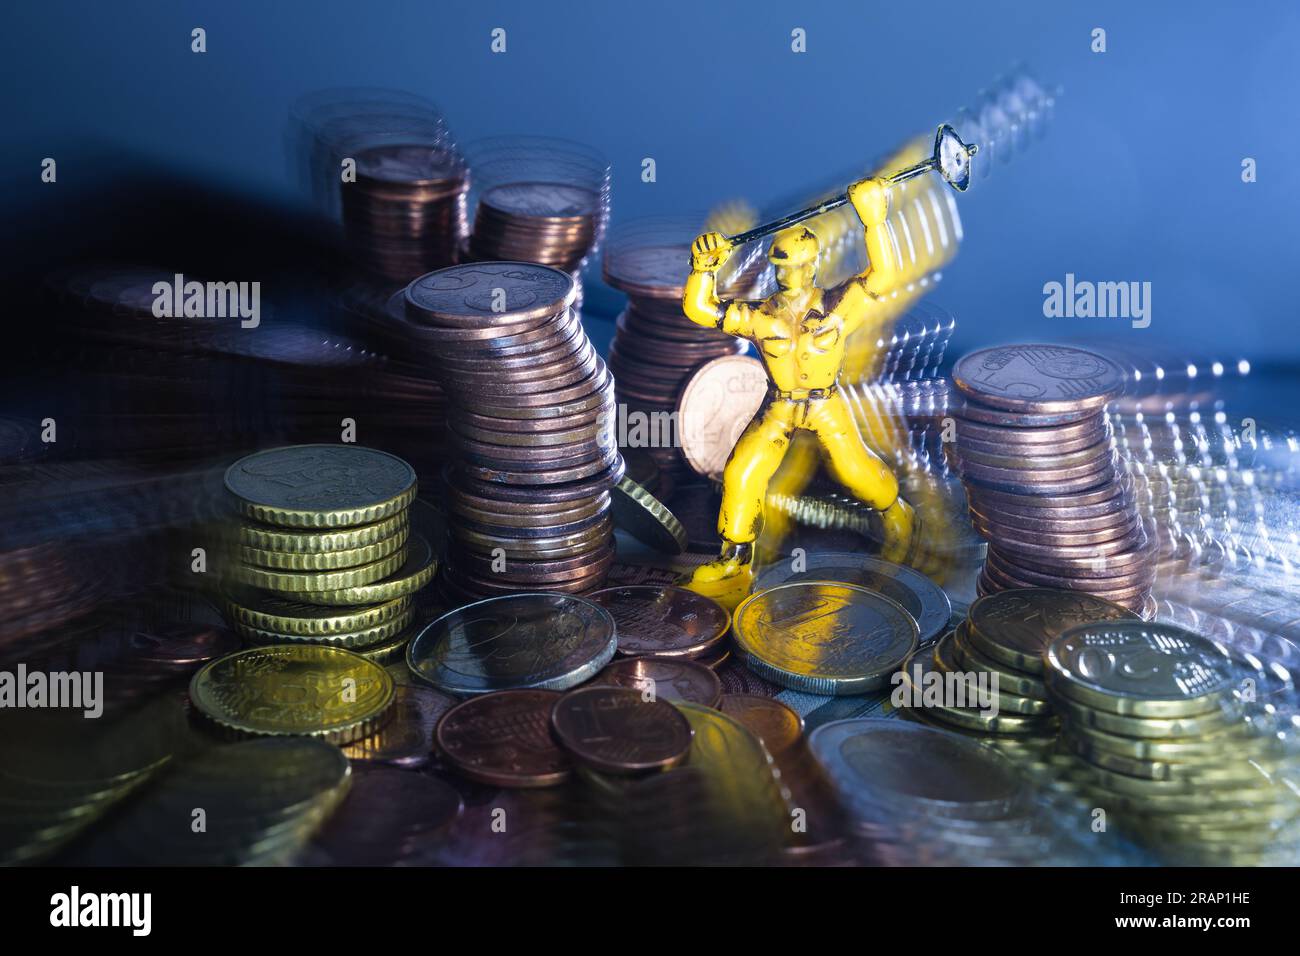 Creative composition, many Euro coins hit by a toy pickaxe, movement photographic technique. Stock Photo